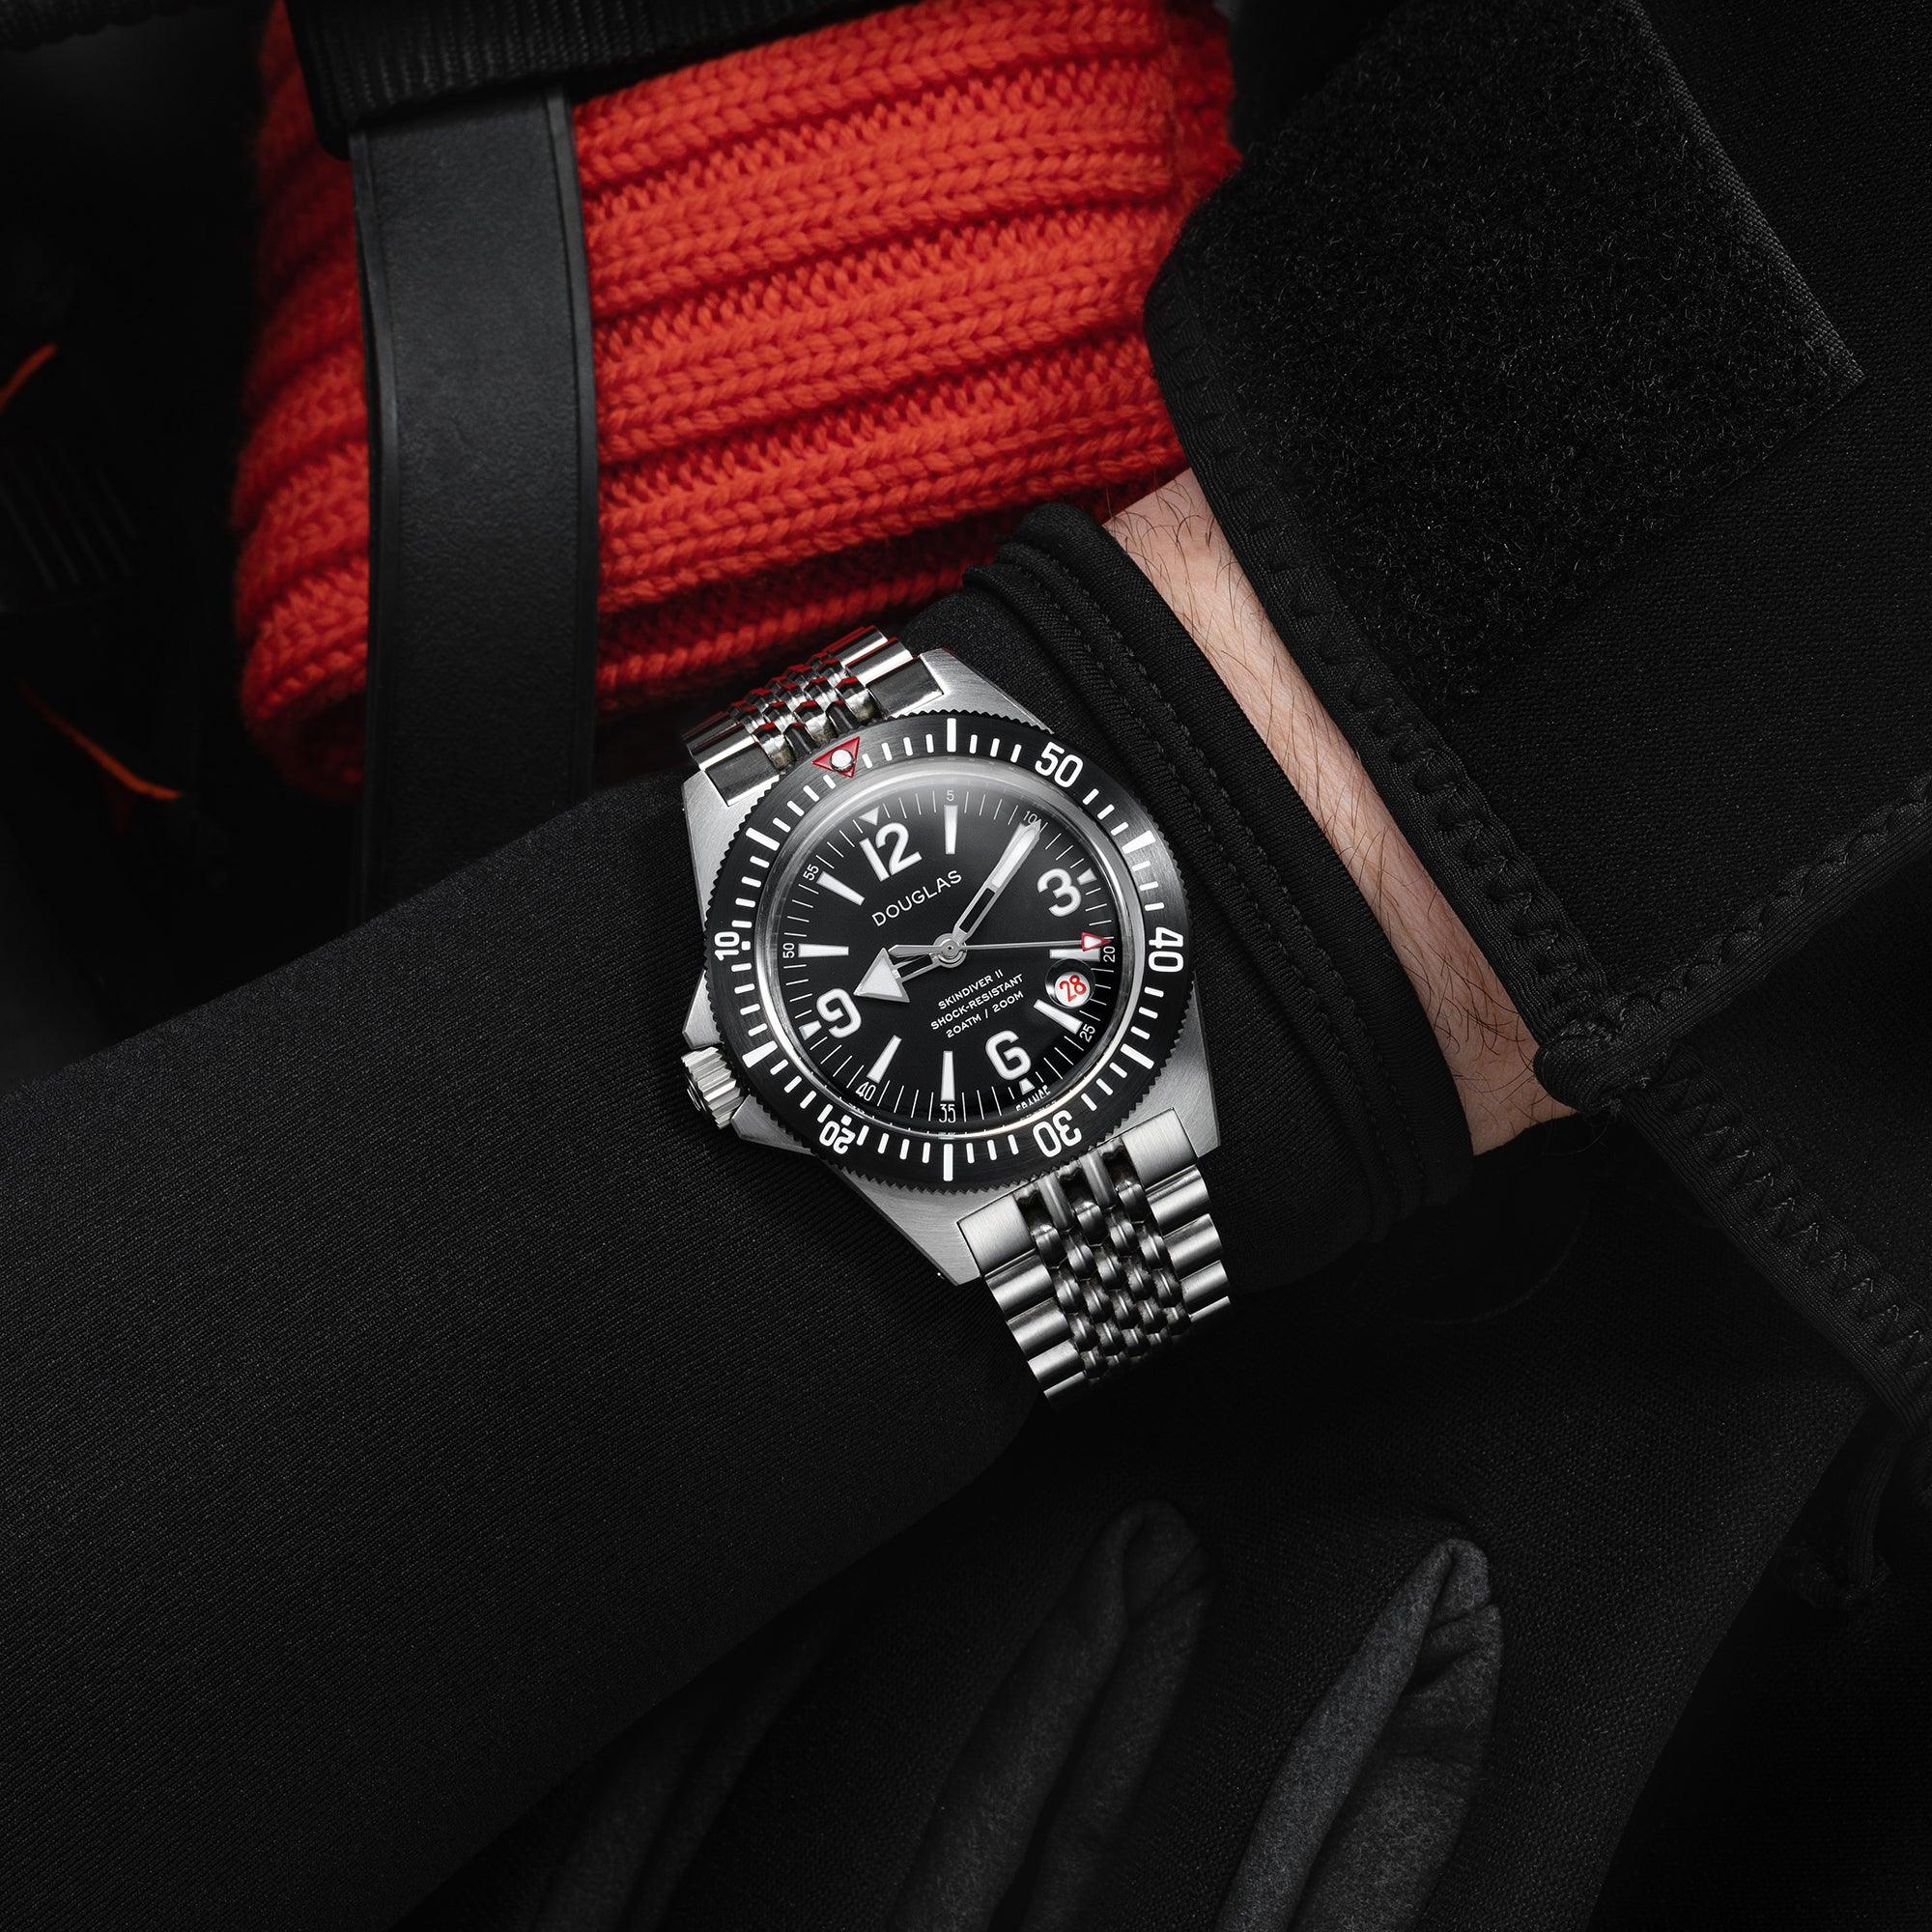 Skindiver II Professional Diving Watch - White Lum & Black Dial - Wolbrook Watches